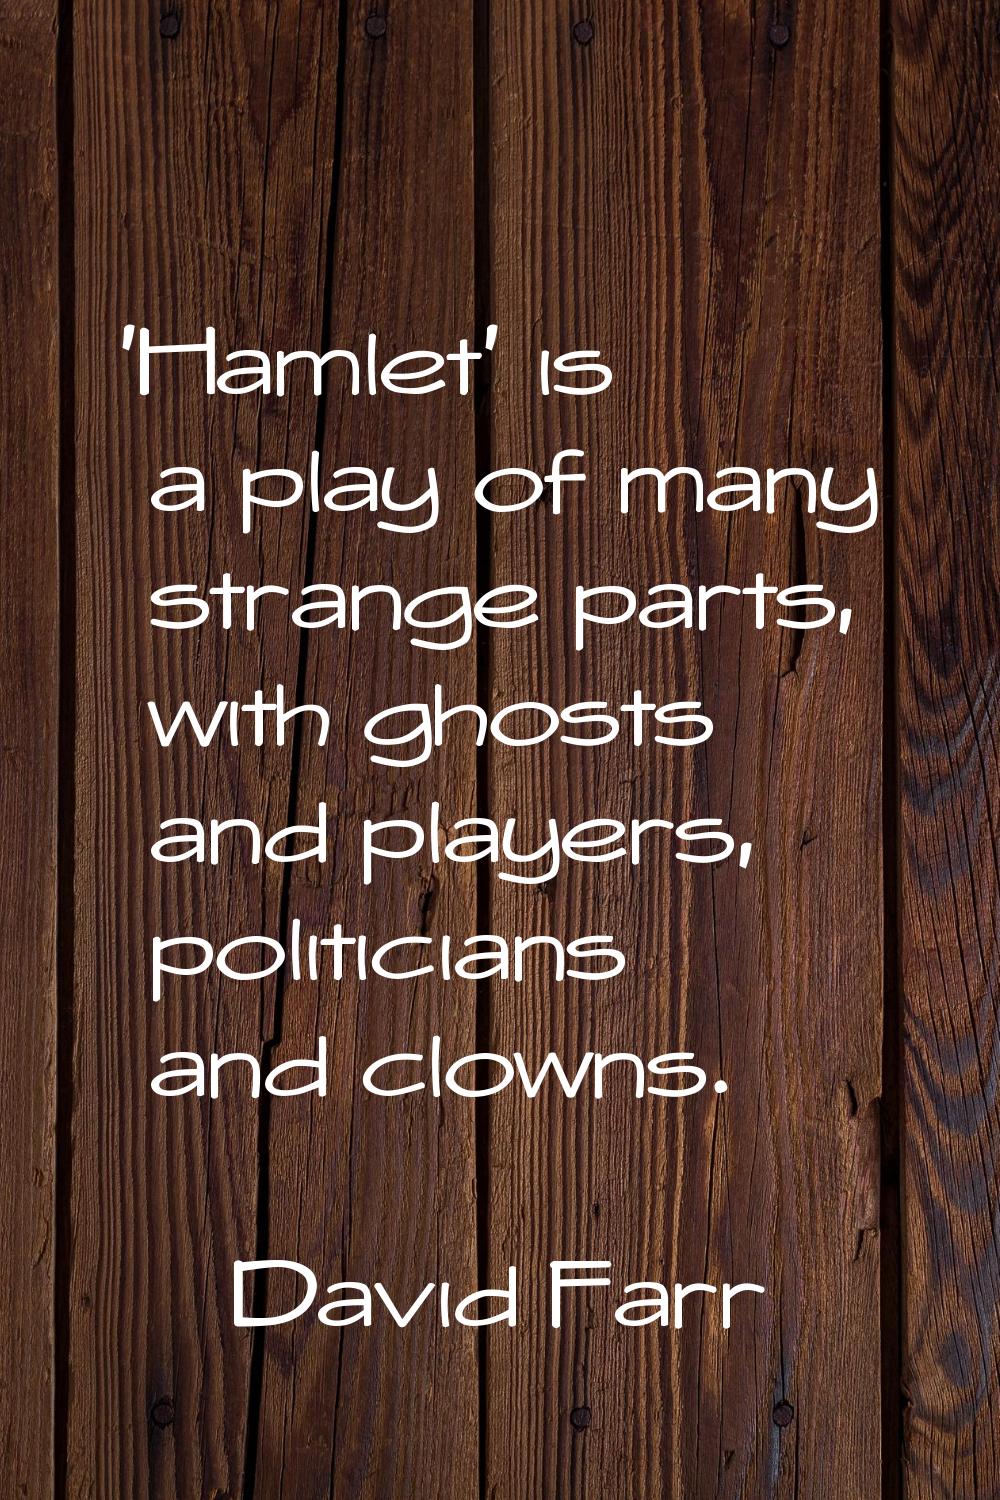 'Hamlet' is a play of many strange parts, with ghosts and players, politicians and clowns.